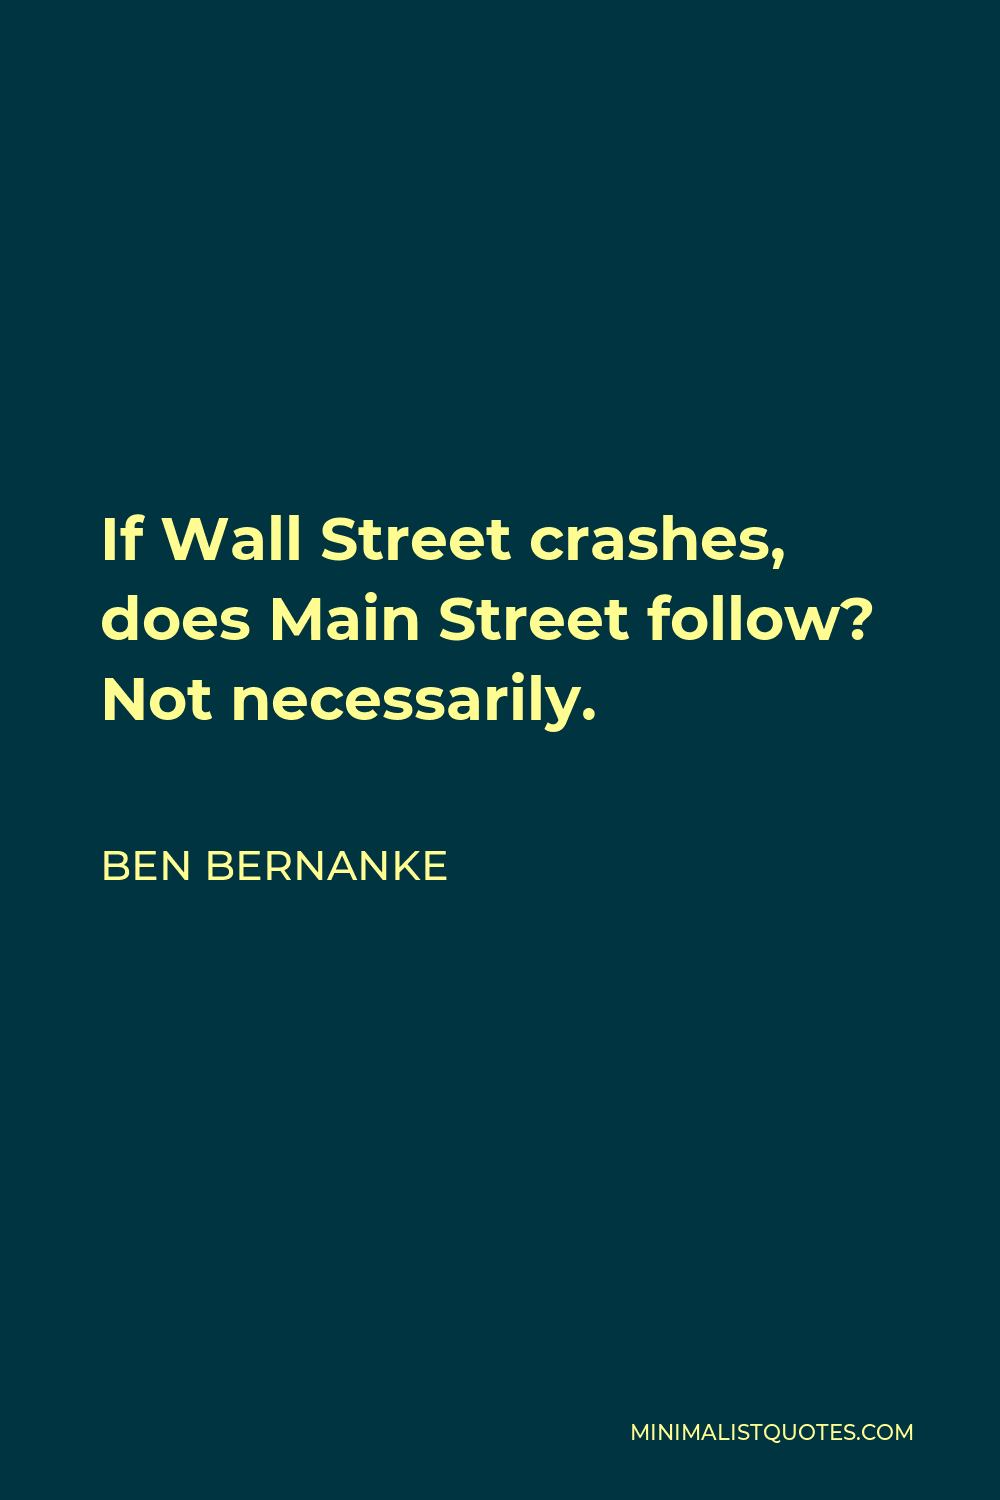 Ben Bernanke Quote - If Wall Street crashes, does Main Street follow? Not necessarily.